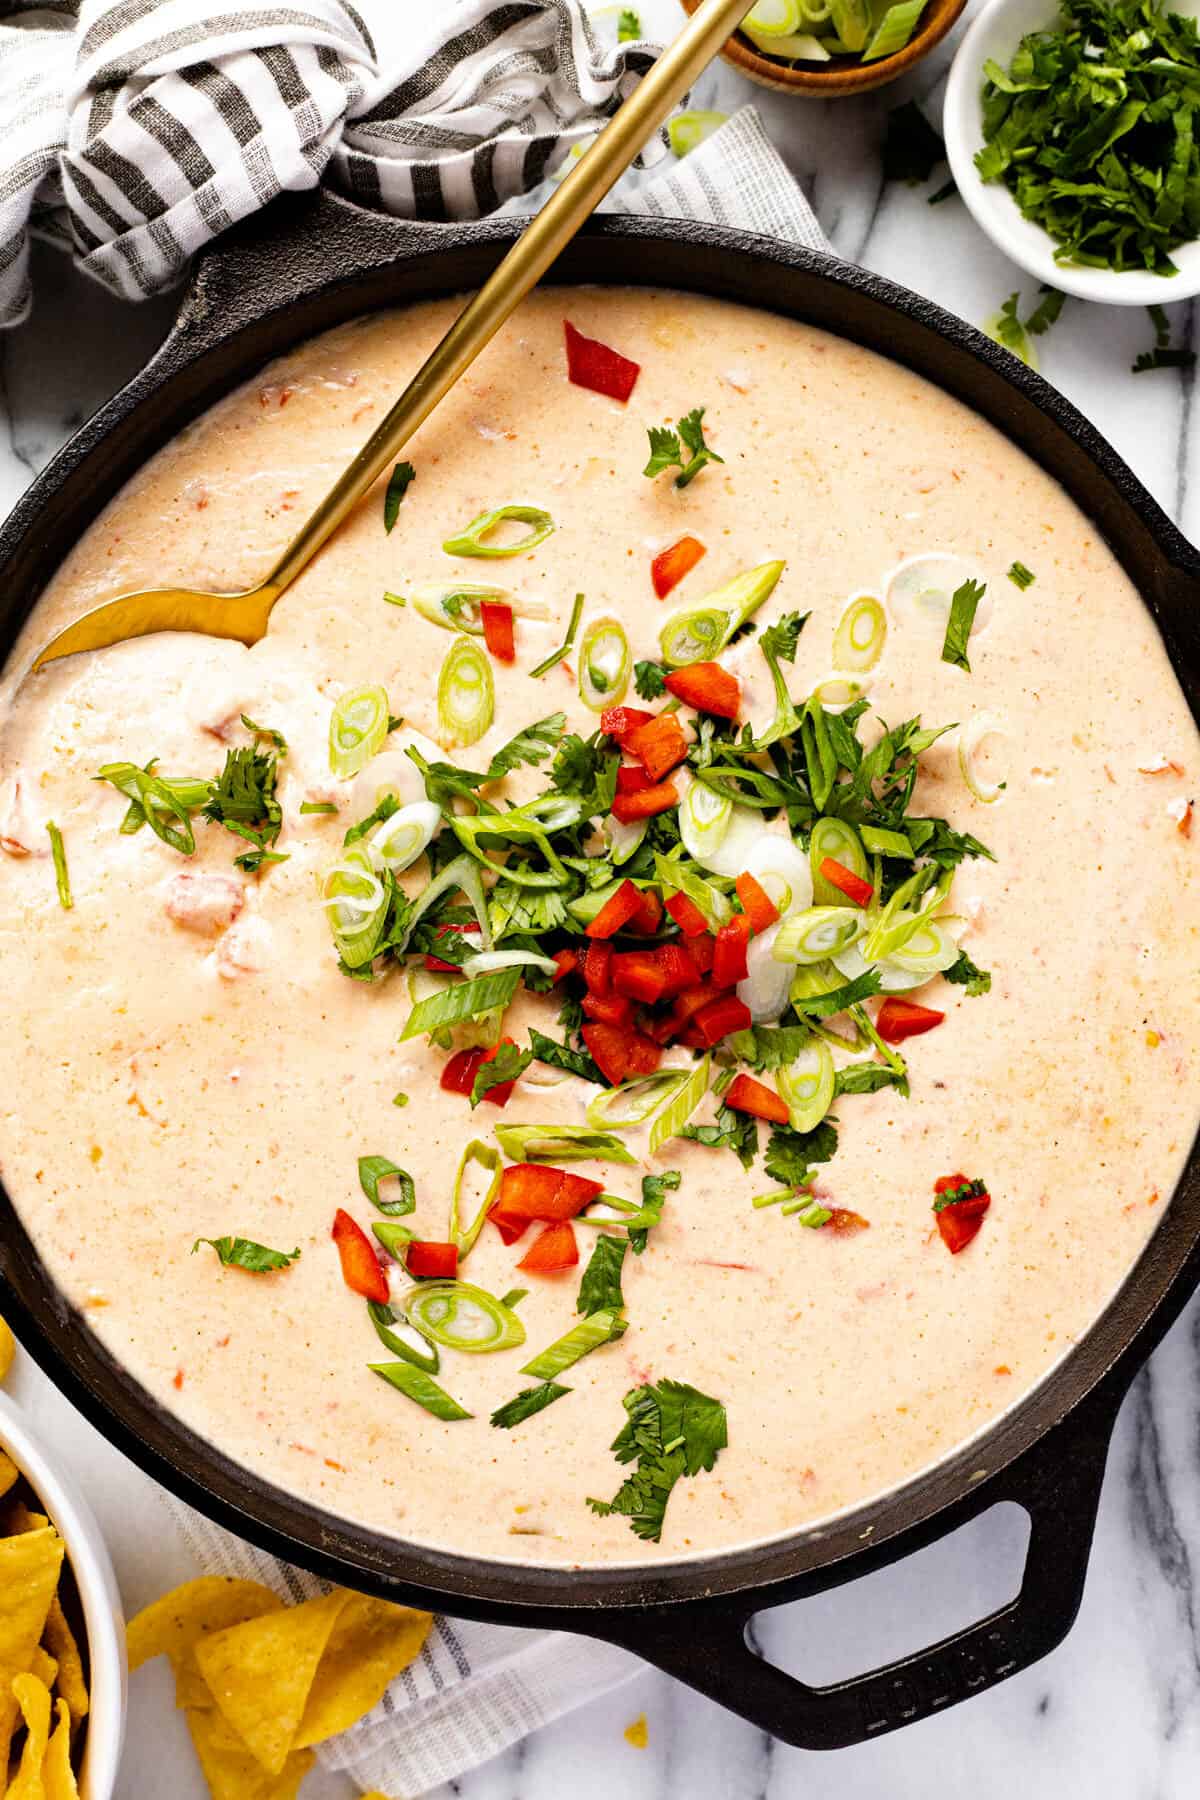 Large cast iron skillet filled with smoked queso dip.